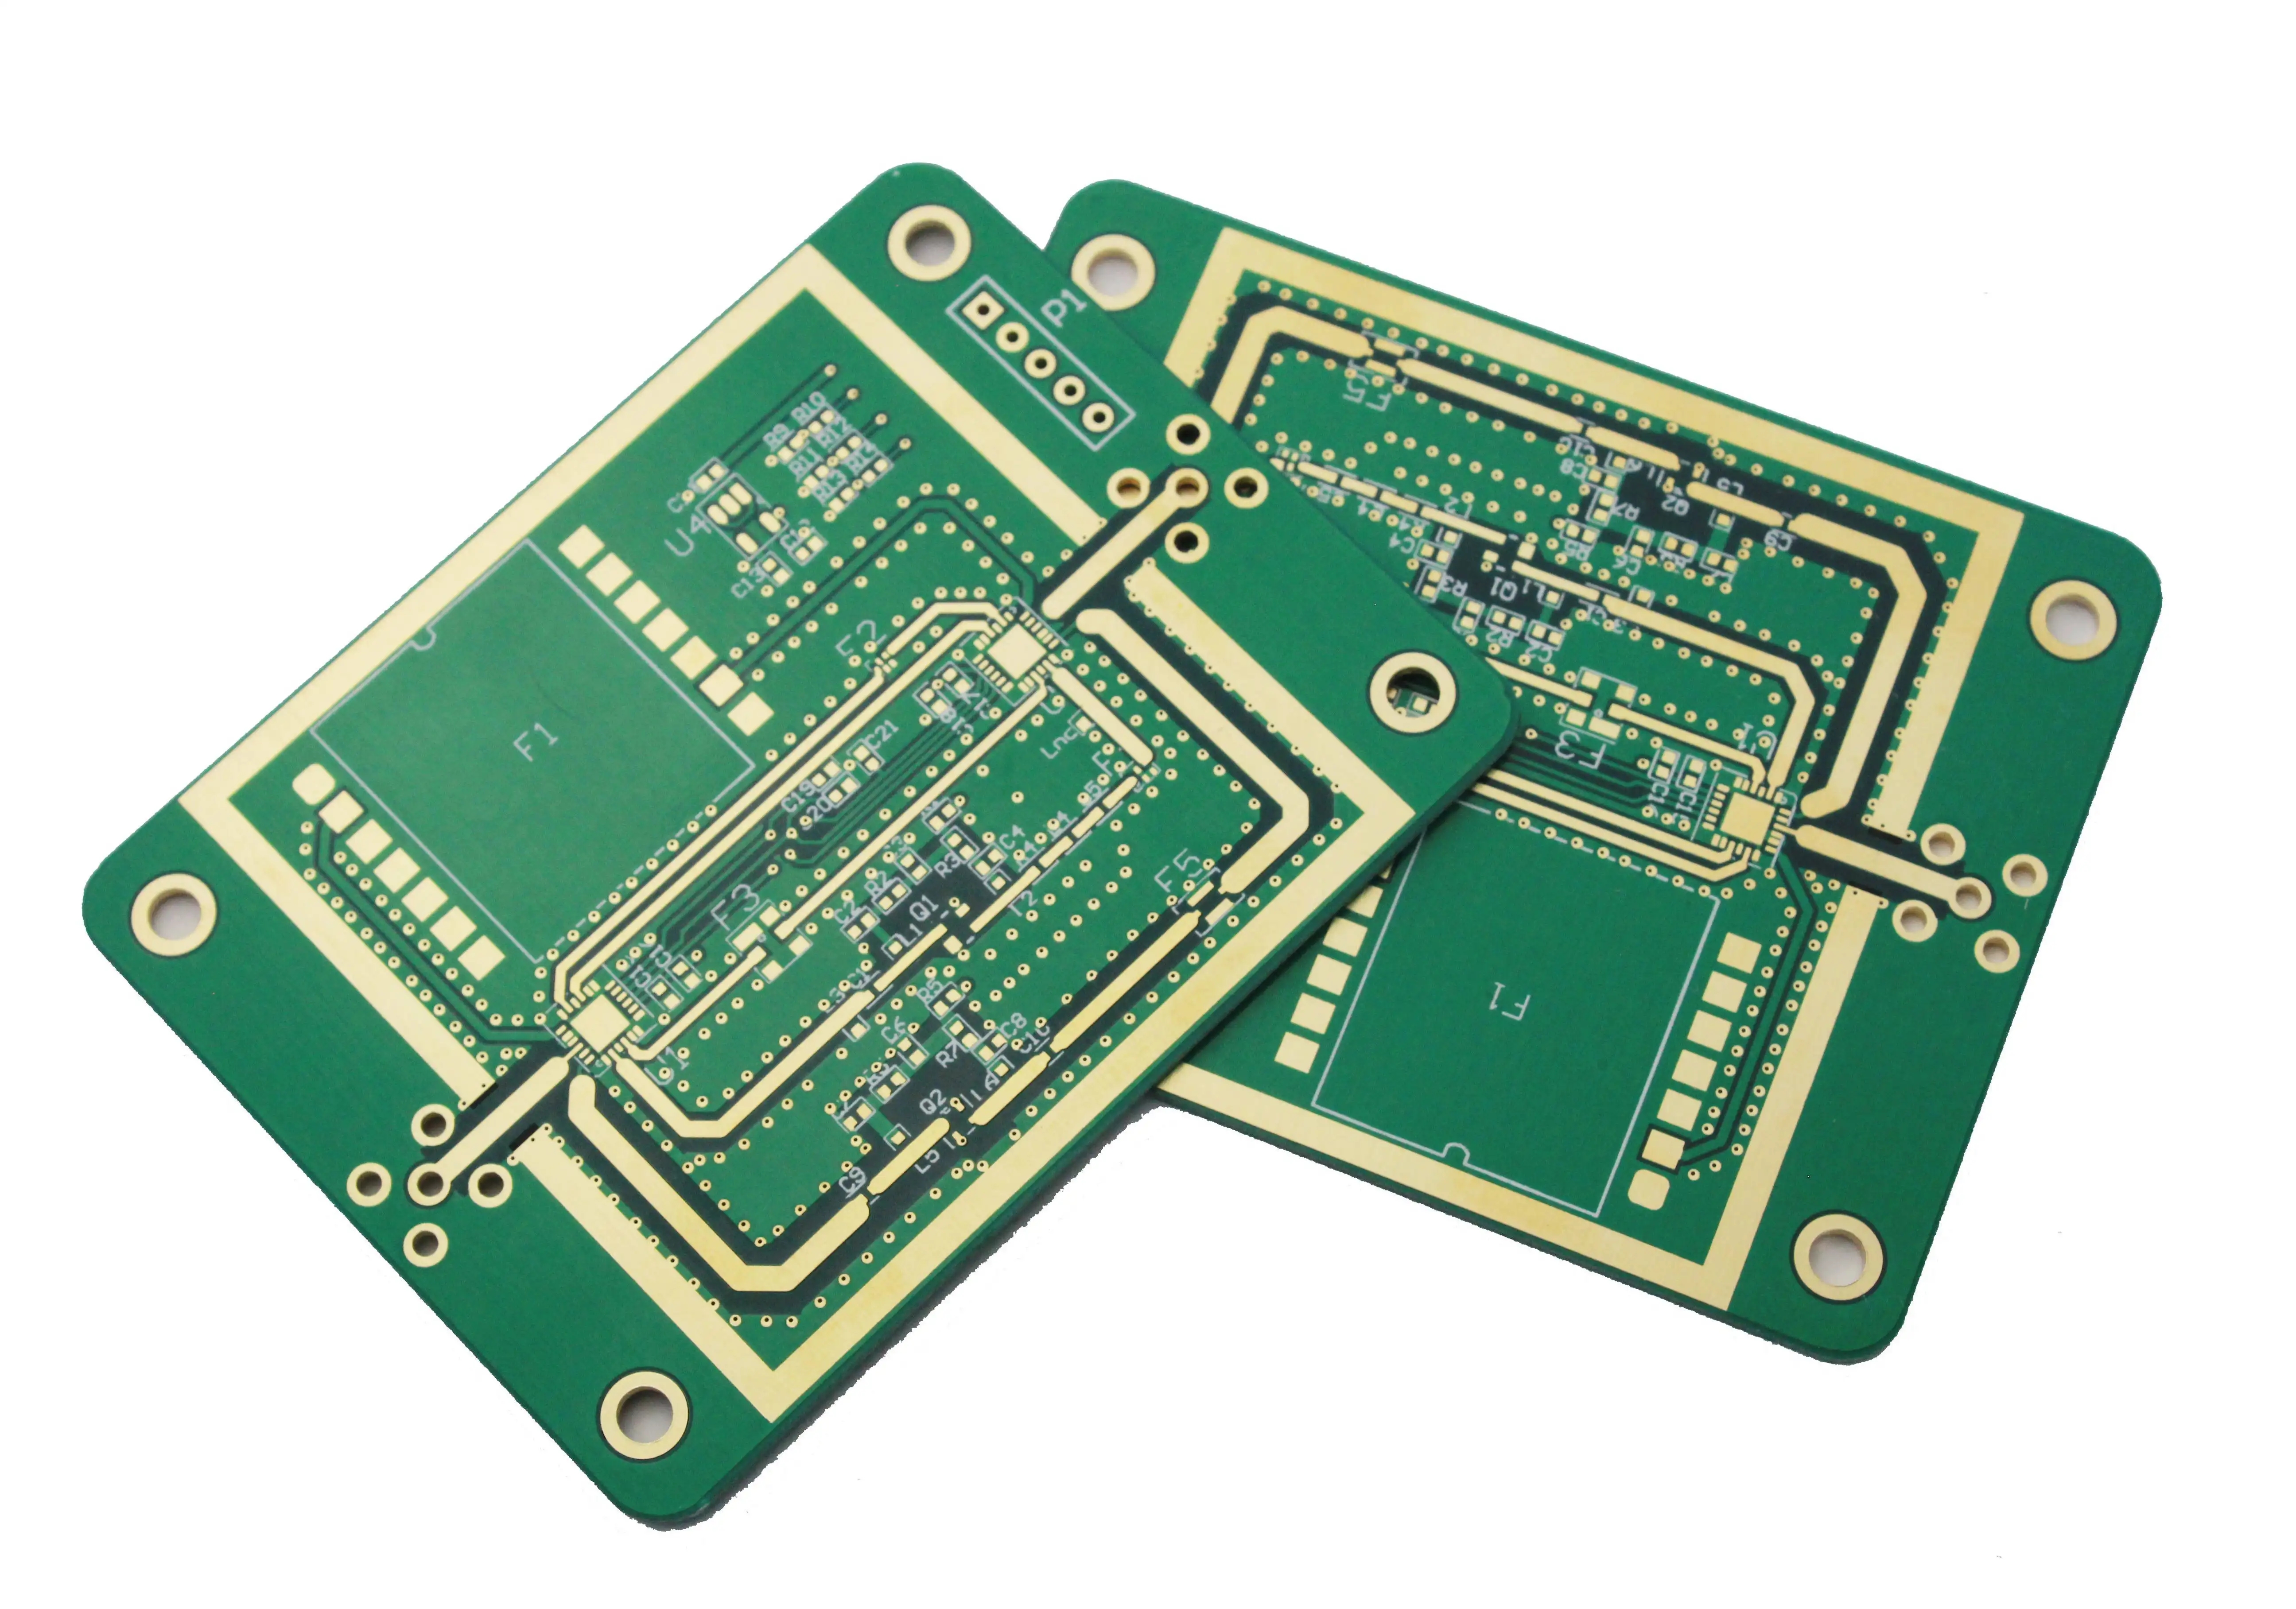 Knowledge of PCB proofing and how to distinguish the quality of ceramic substrate